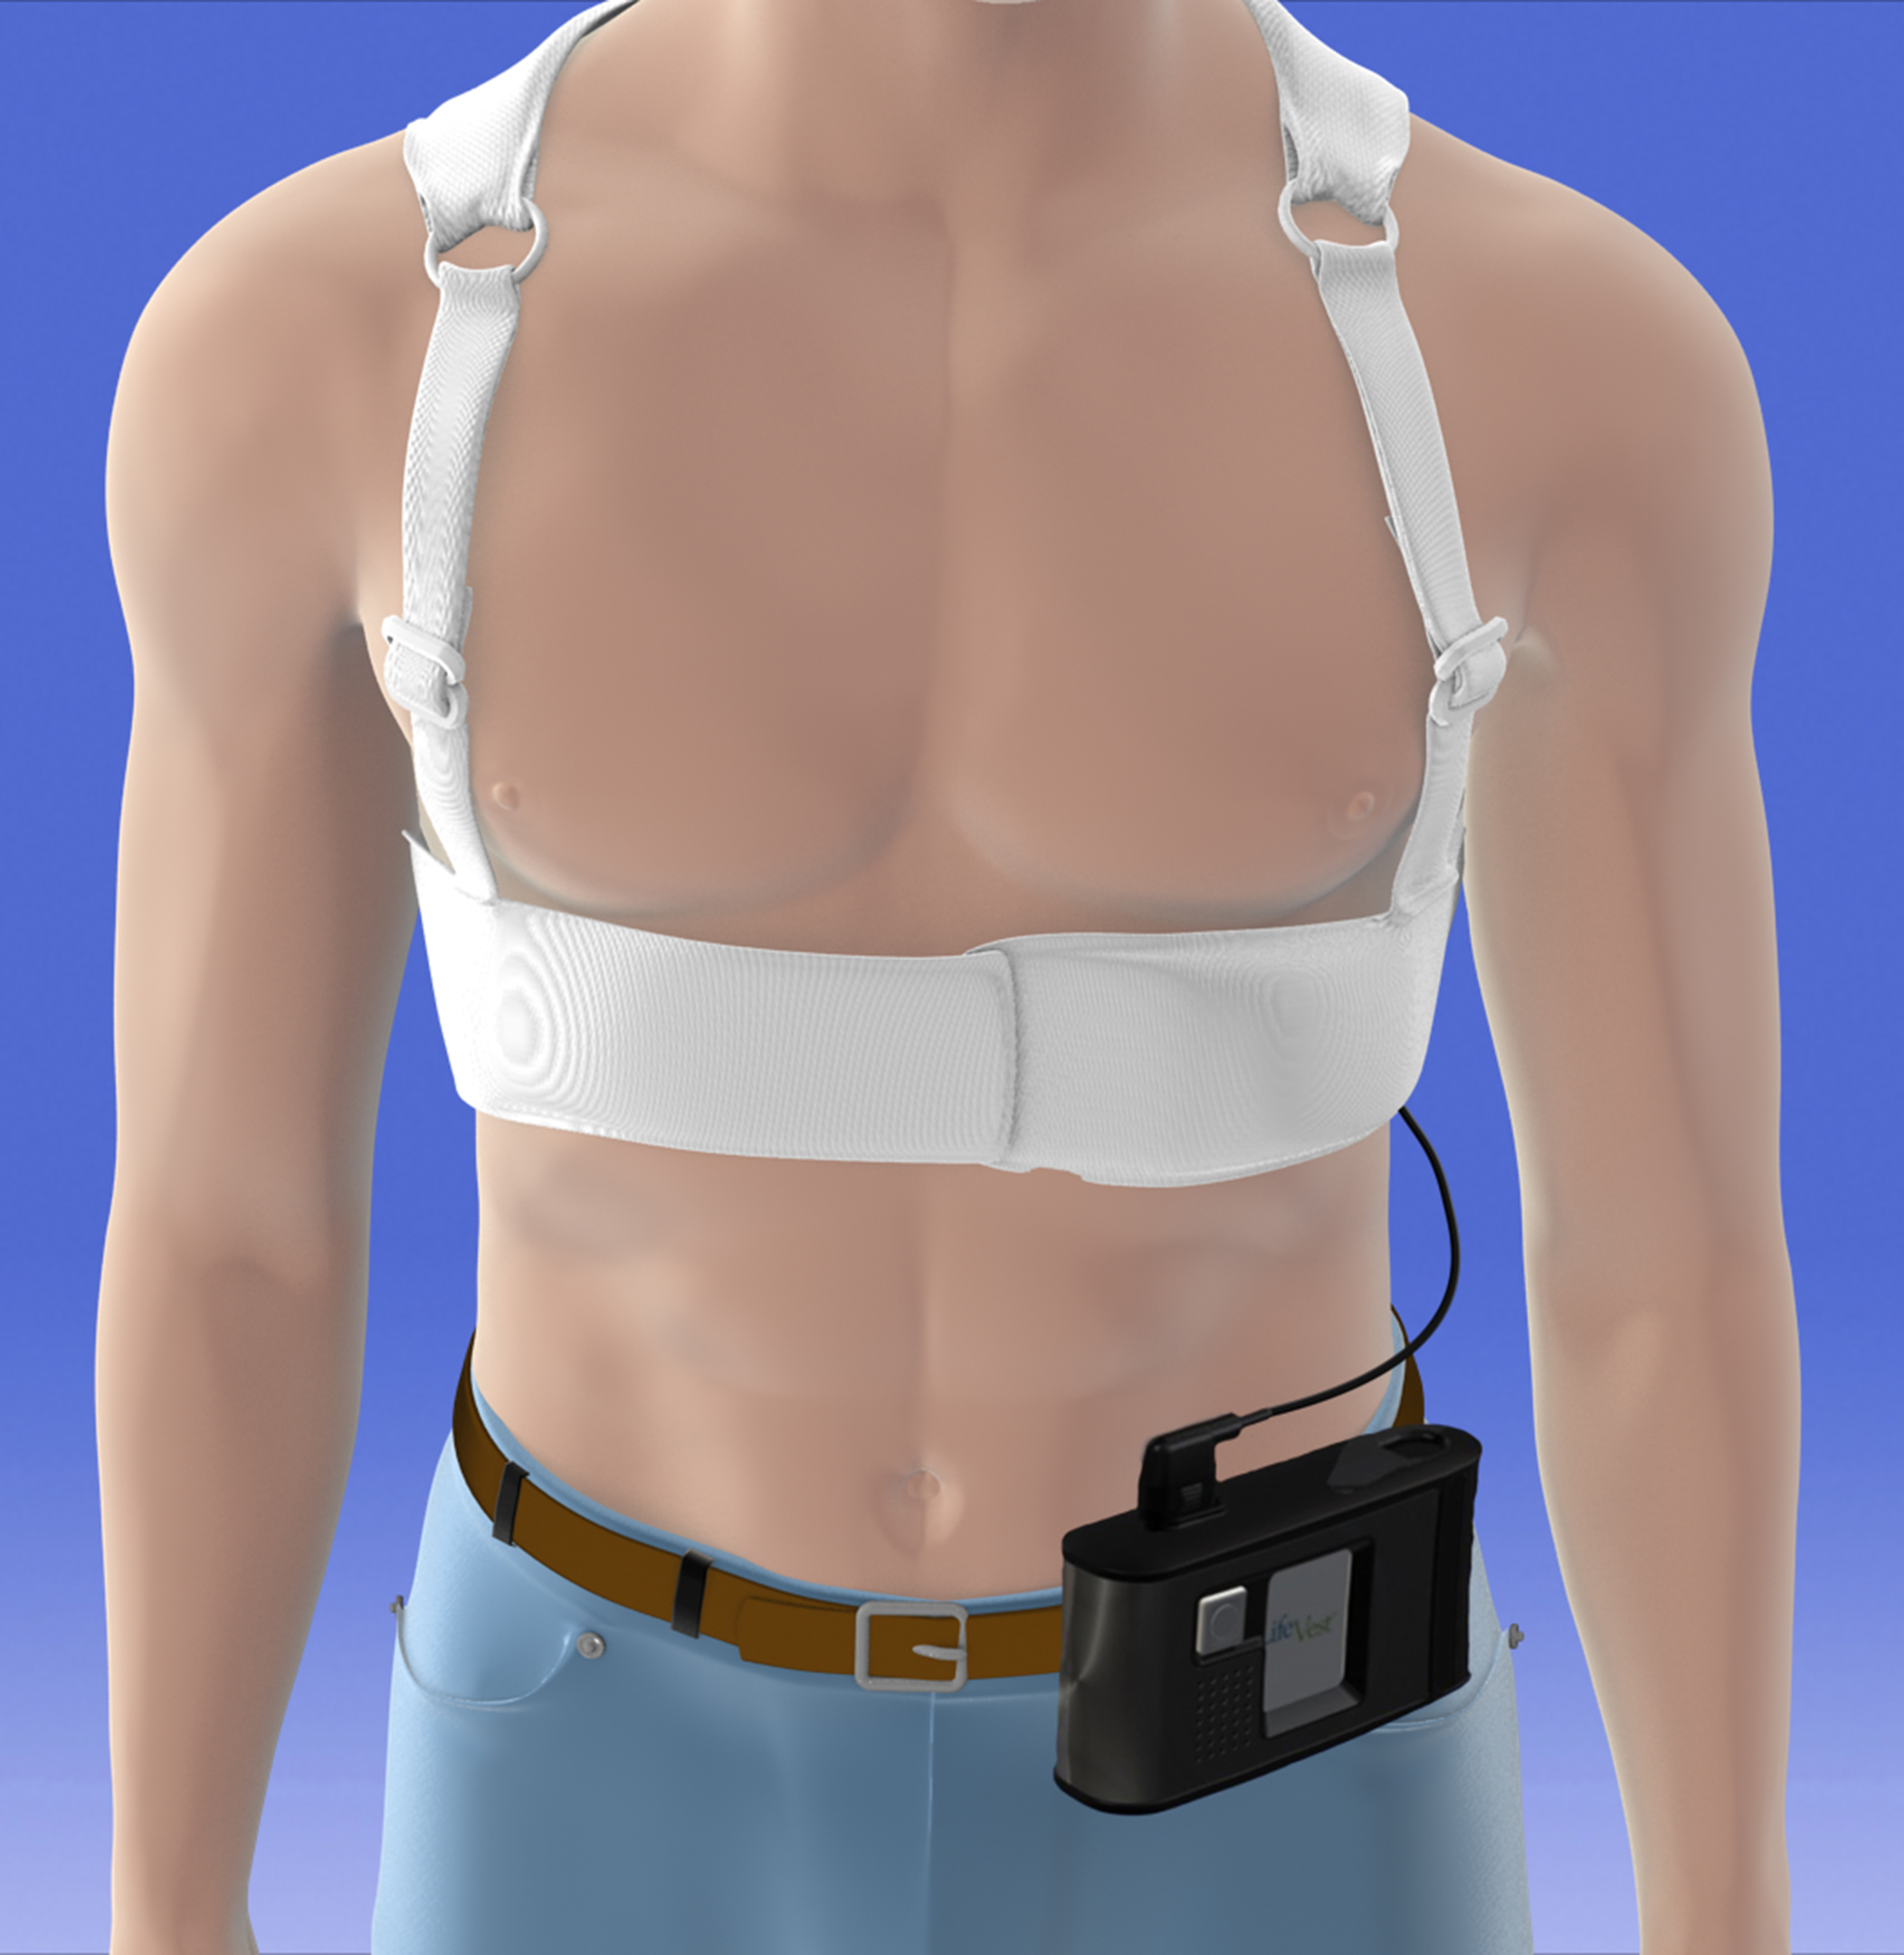 When prescribed post-heart attack, a wearable defibrillator can deliver a life-saving shock in the event of sudden cardiac arrest. The risk of SCA is greatest in the first 30 days after a heart attack